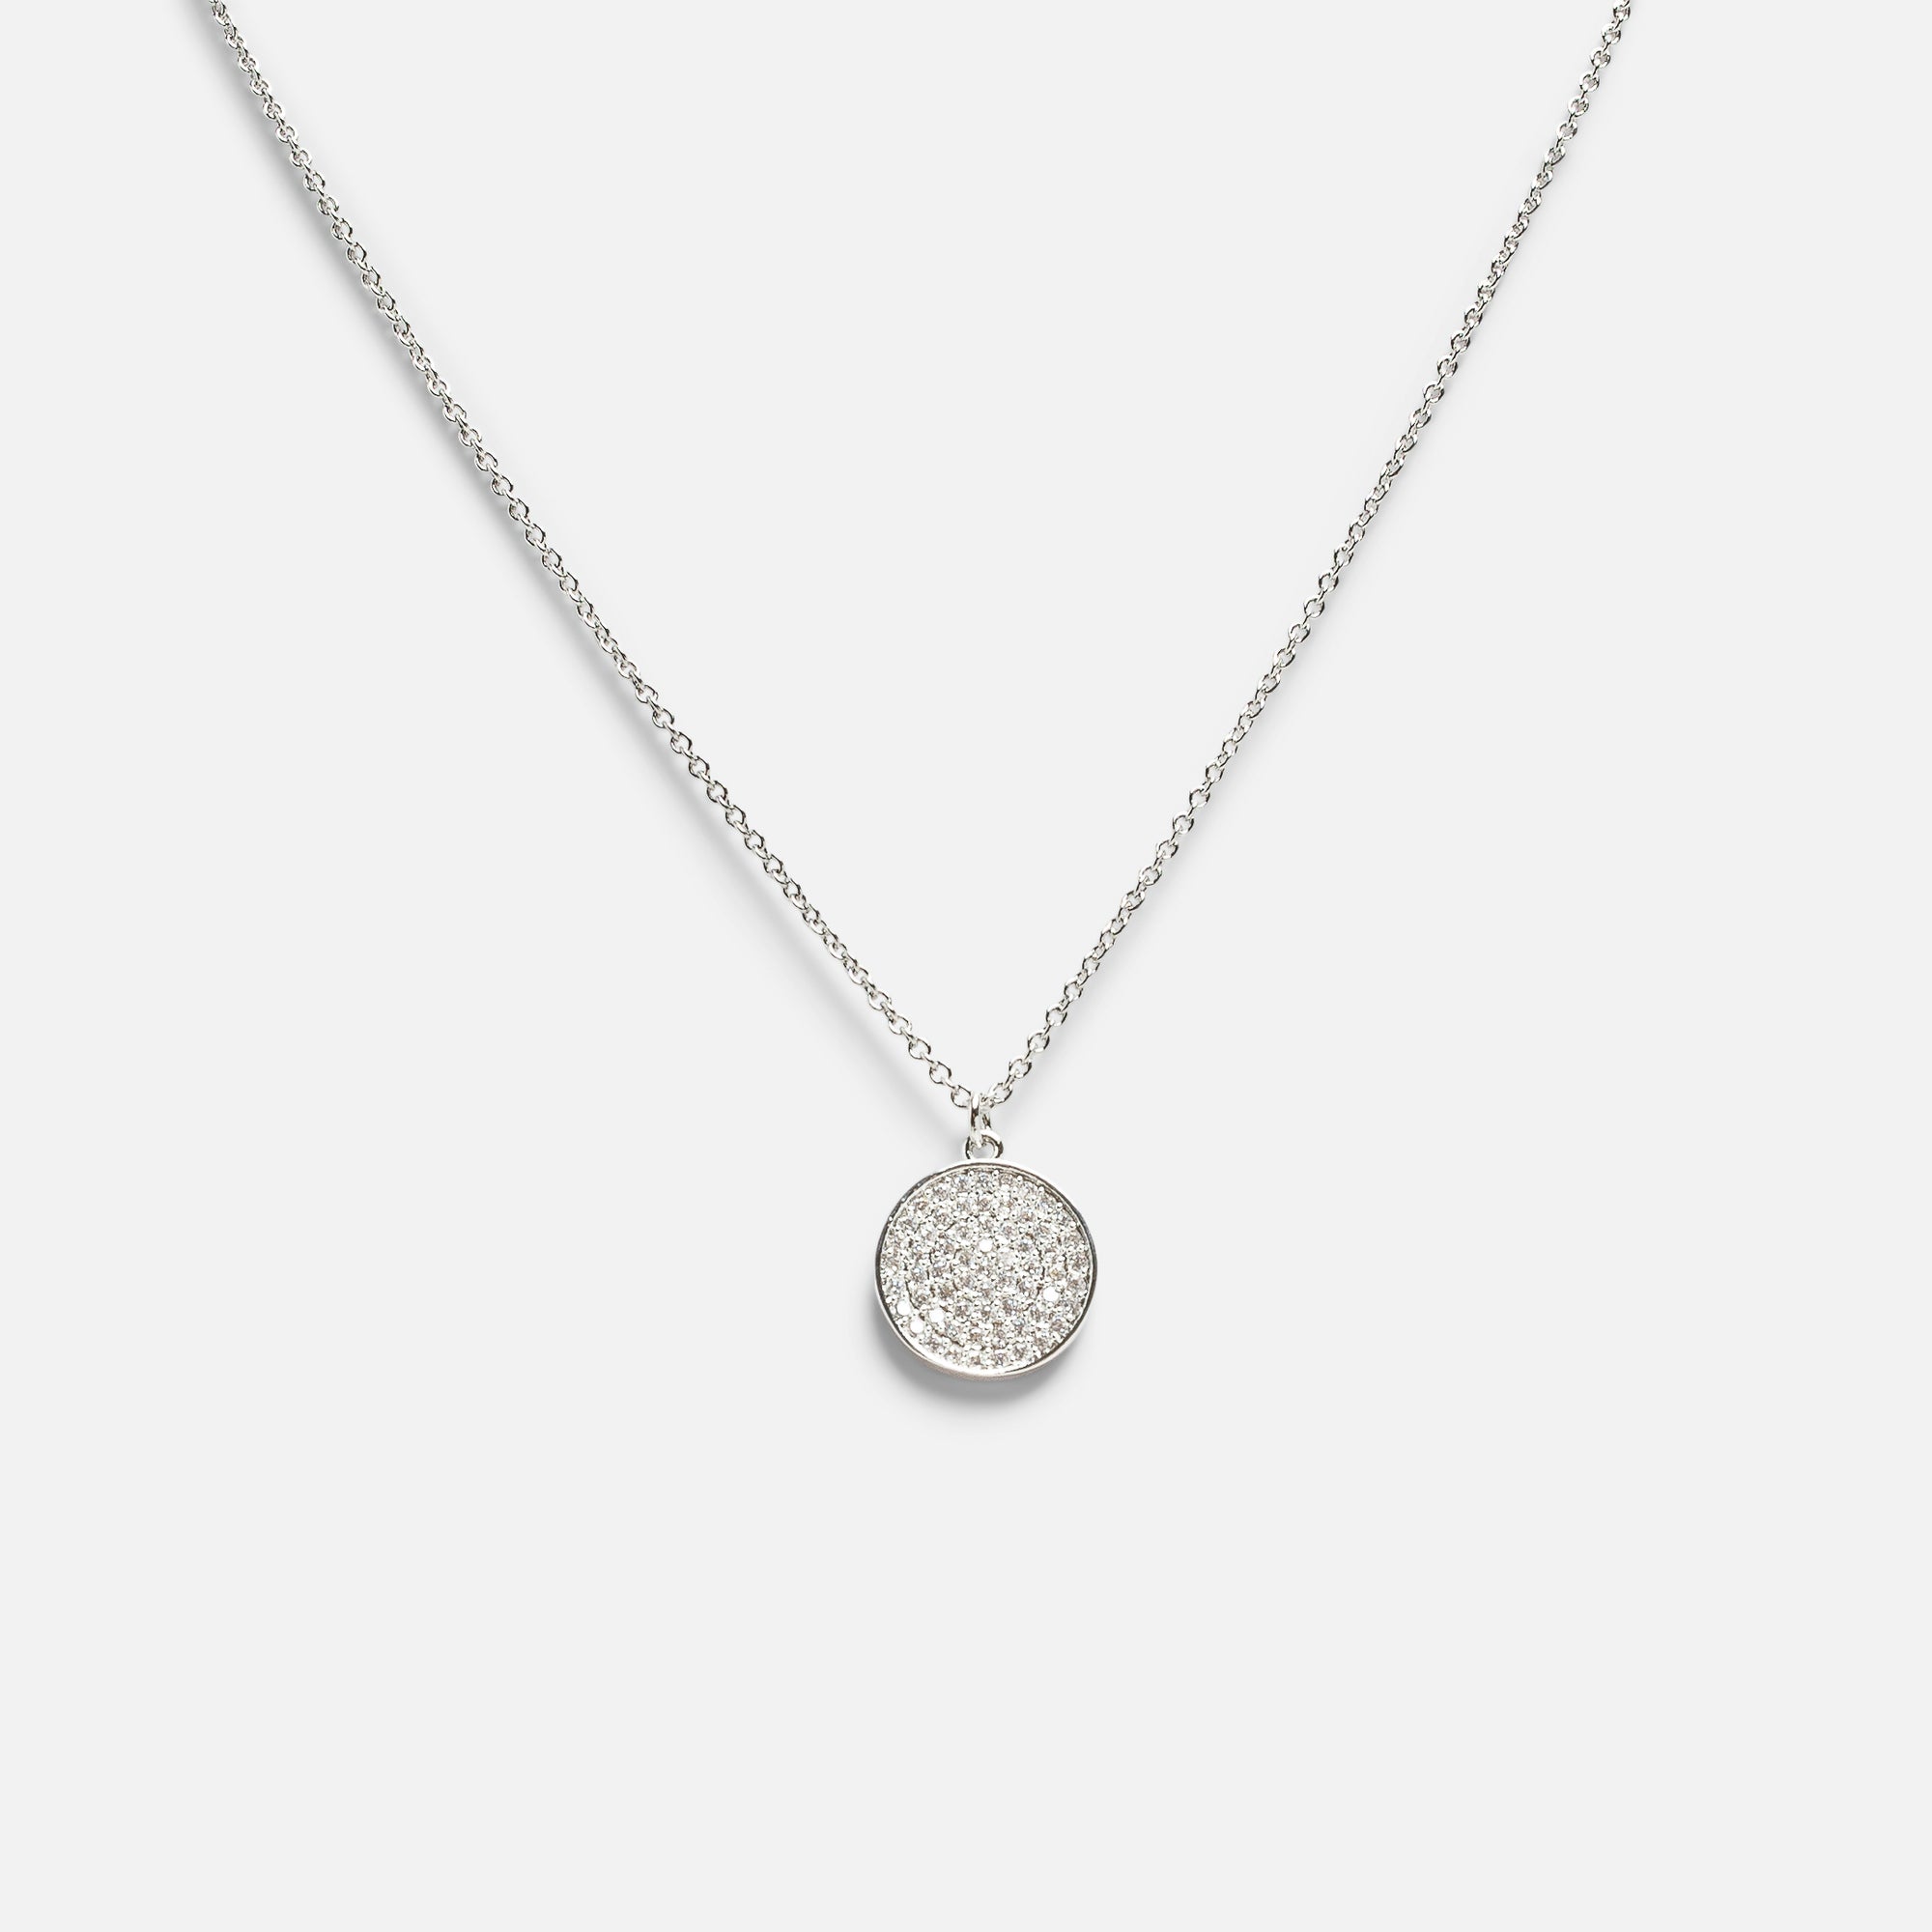 Silver pendant with medallion 